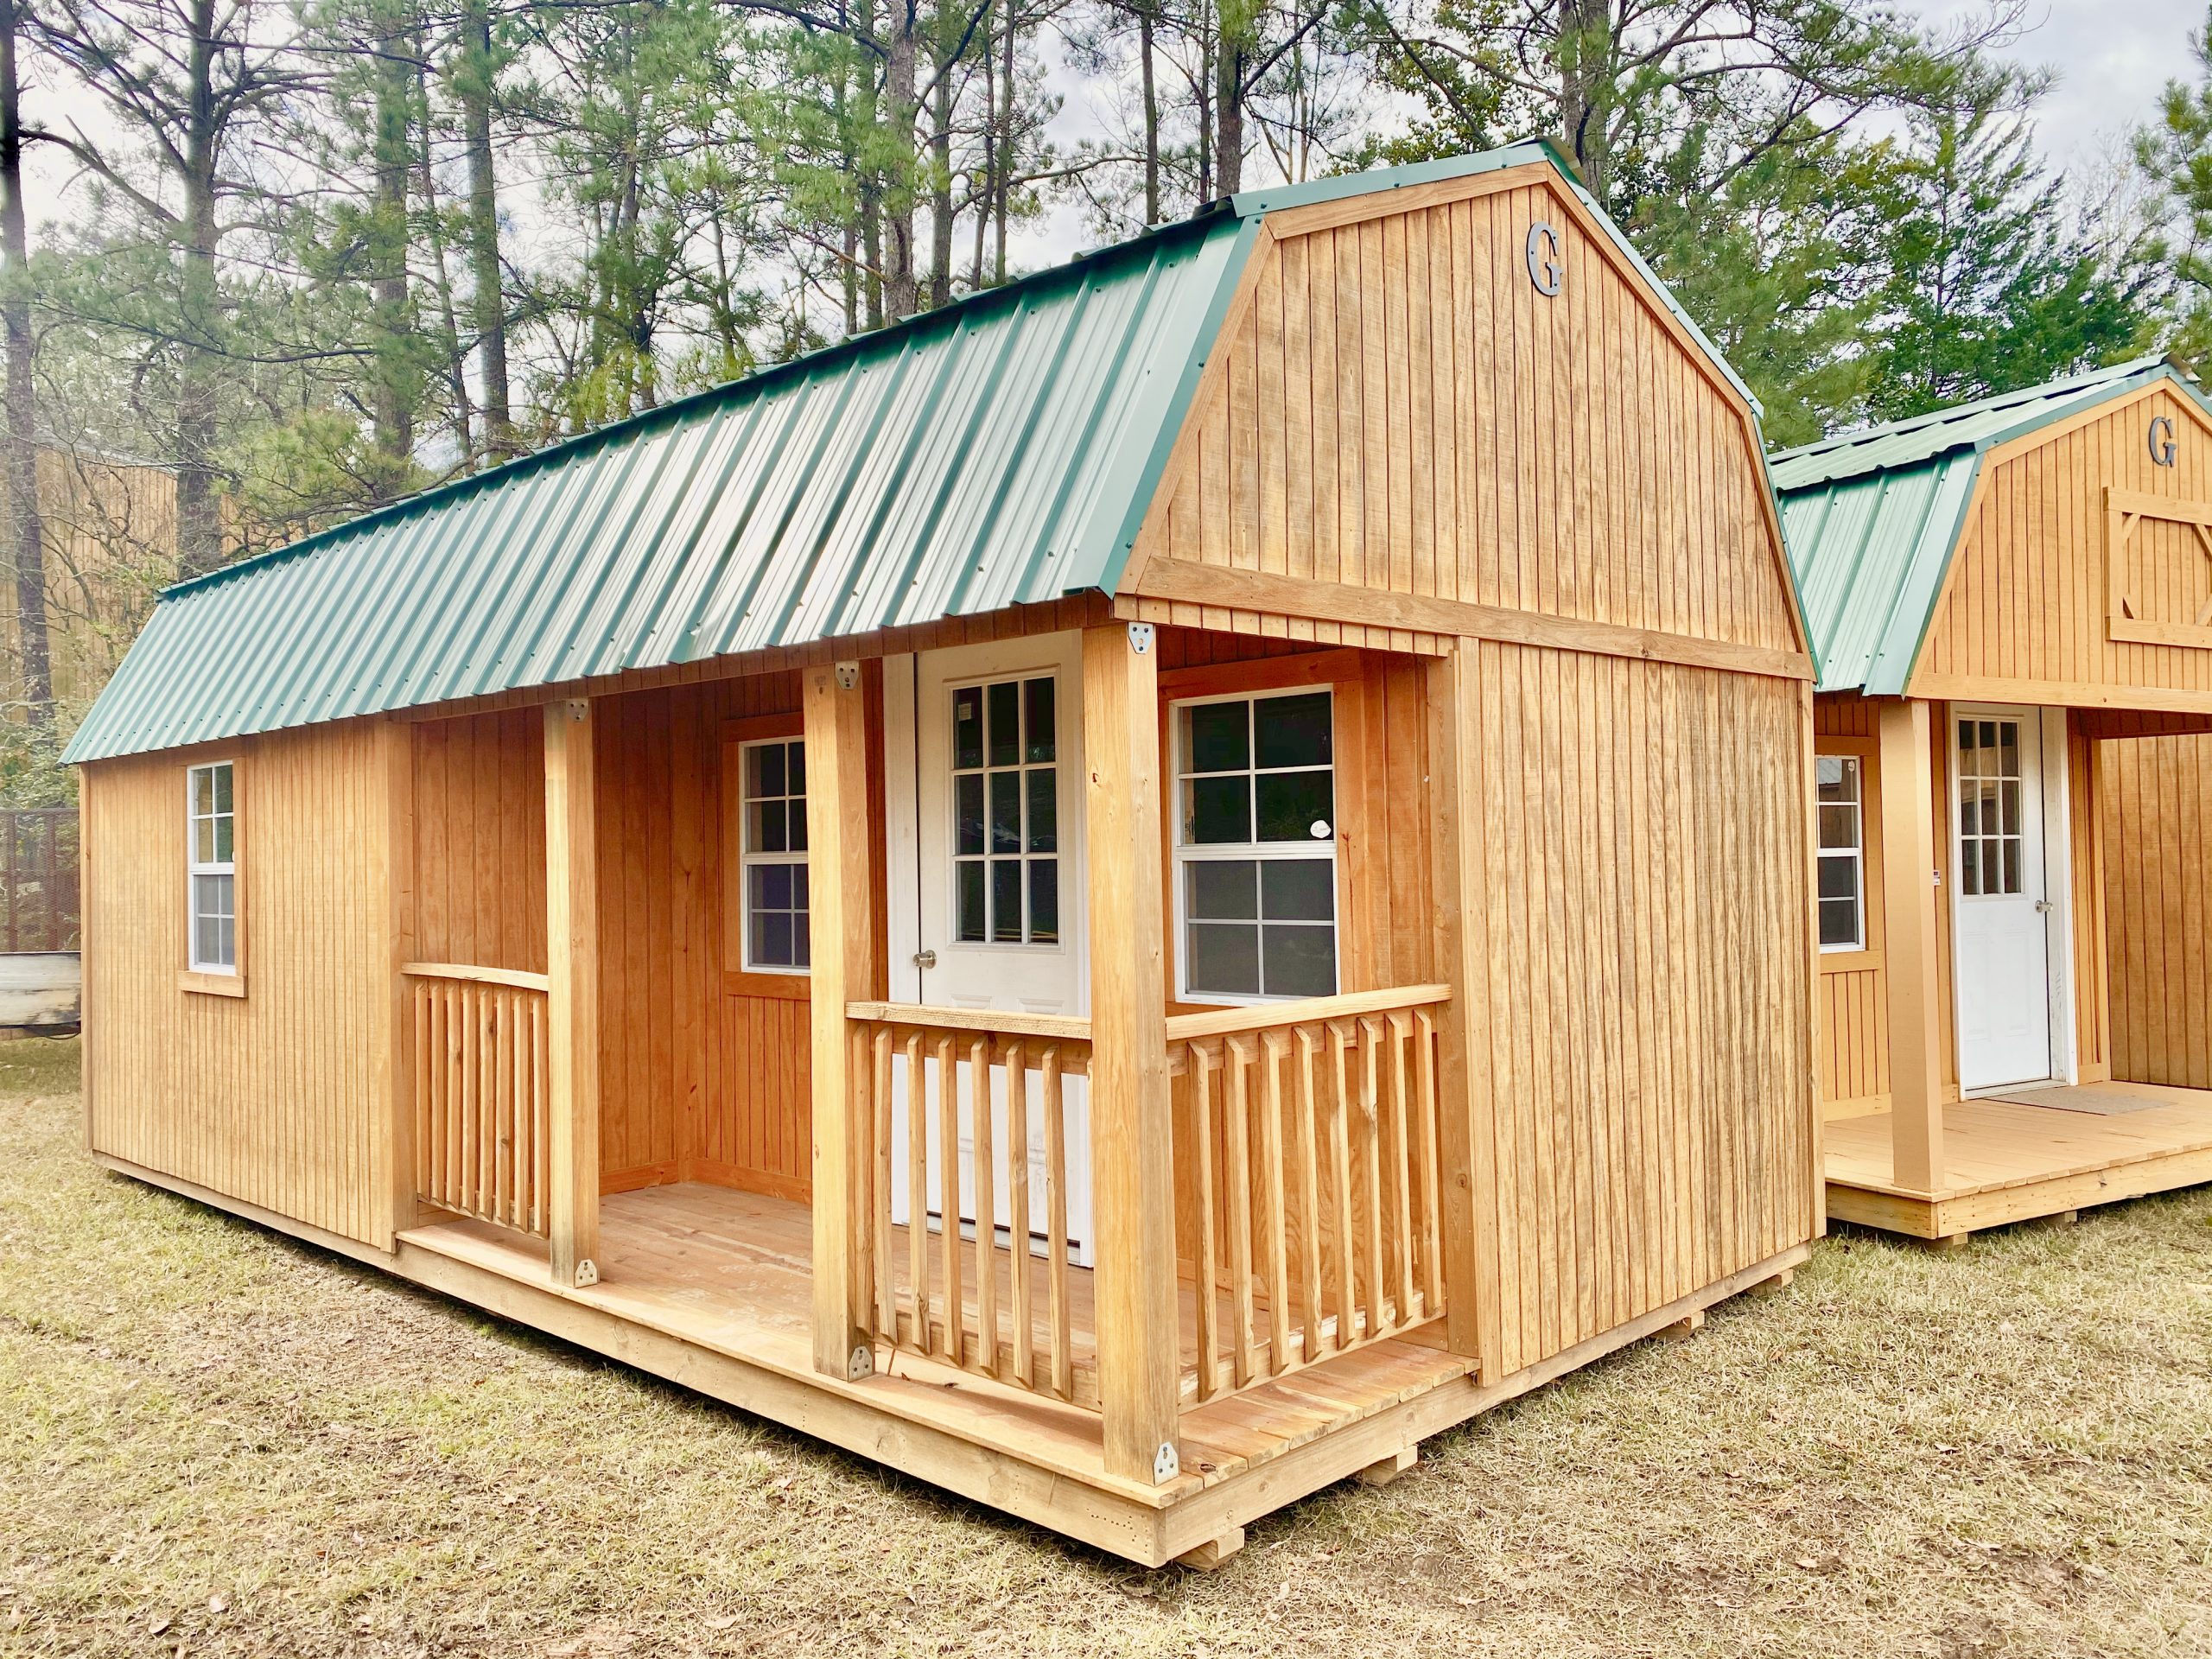 Storage shed plans: Building a shed cabin